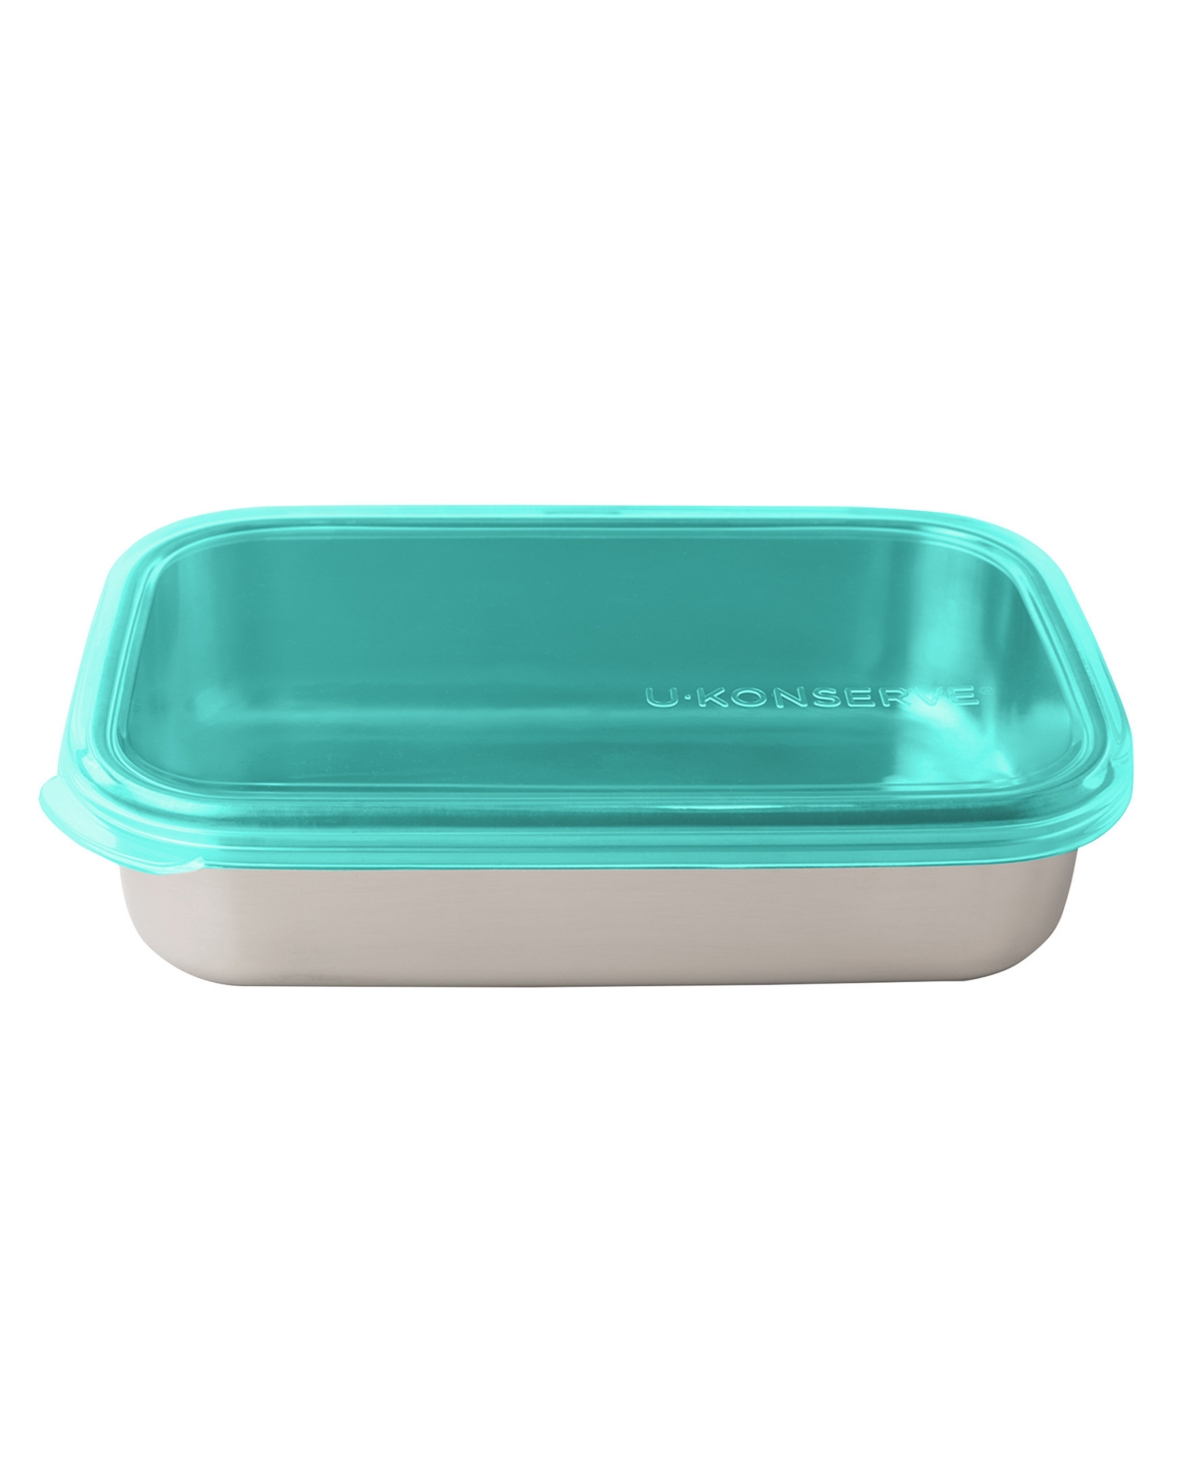 U Konserve Stainless Steel Food To-go Container With Silicone Lid Rectangle, 25 oz In Teal